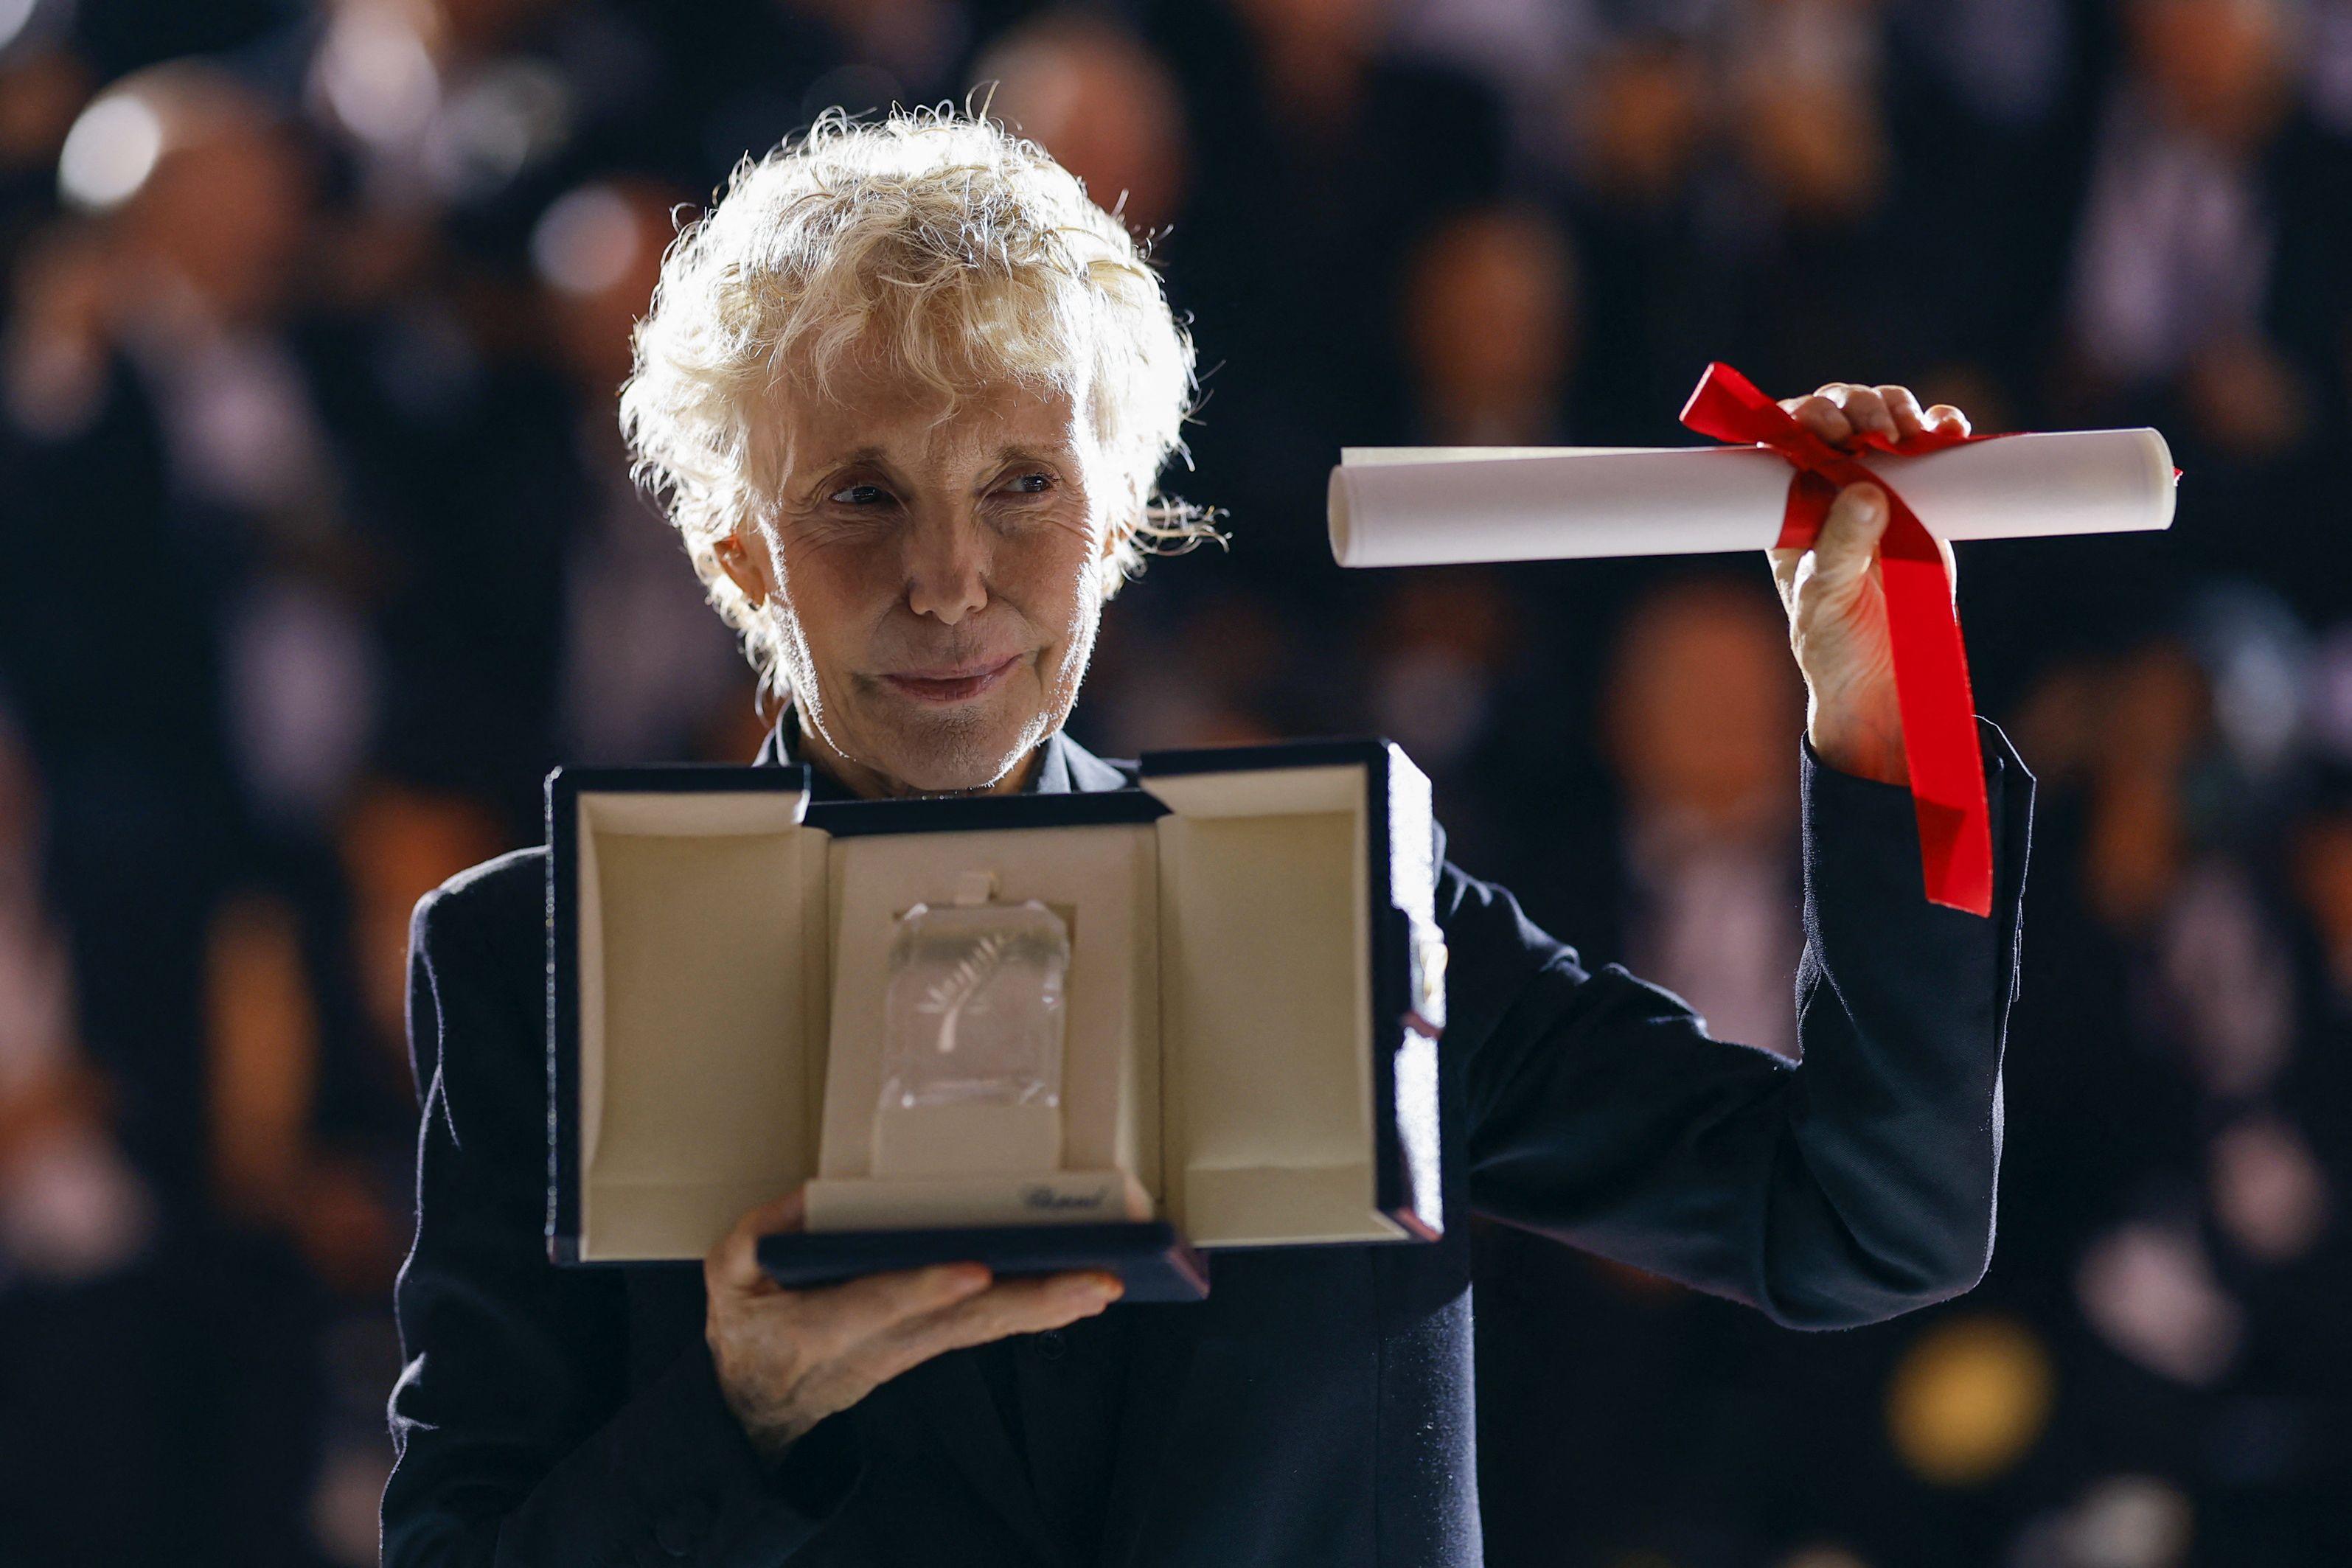 Claire Denis, co-winner of the Grand Jury Prize for the film "Stars at Noon". REUTERS/Stephane Mahe